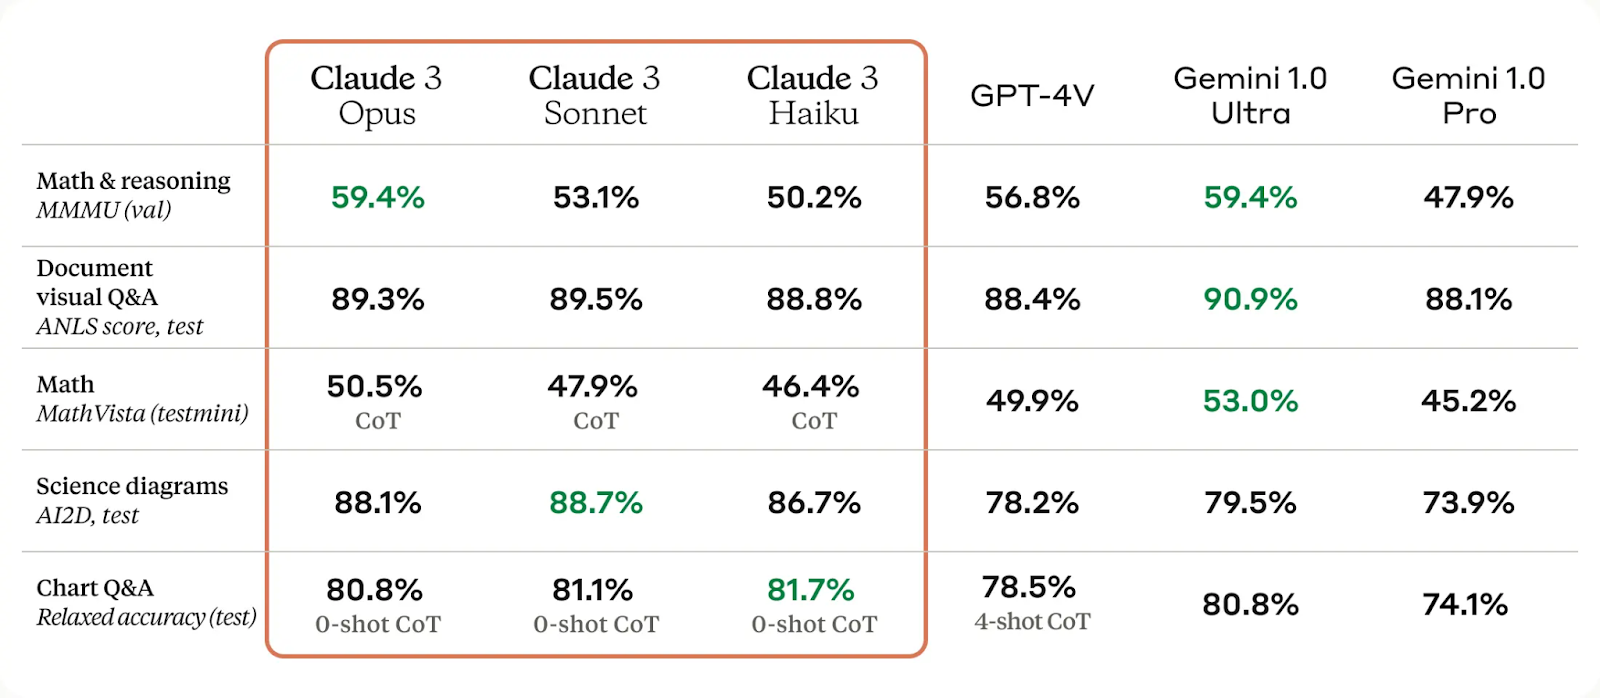 Claude 3 Vision Benchmarks